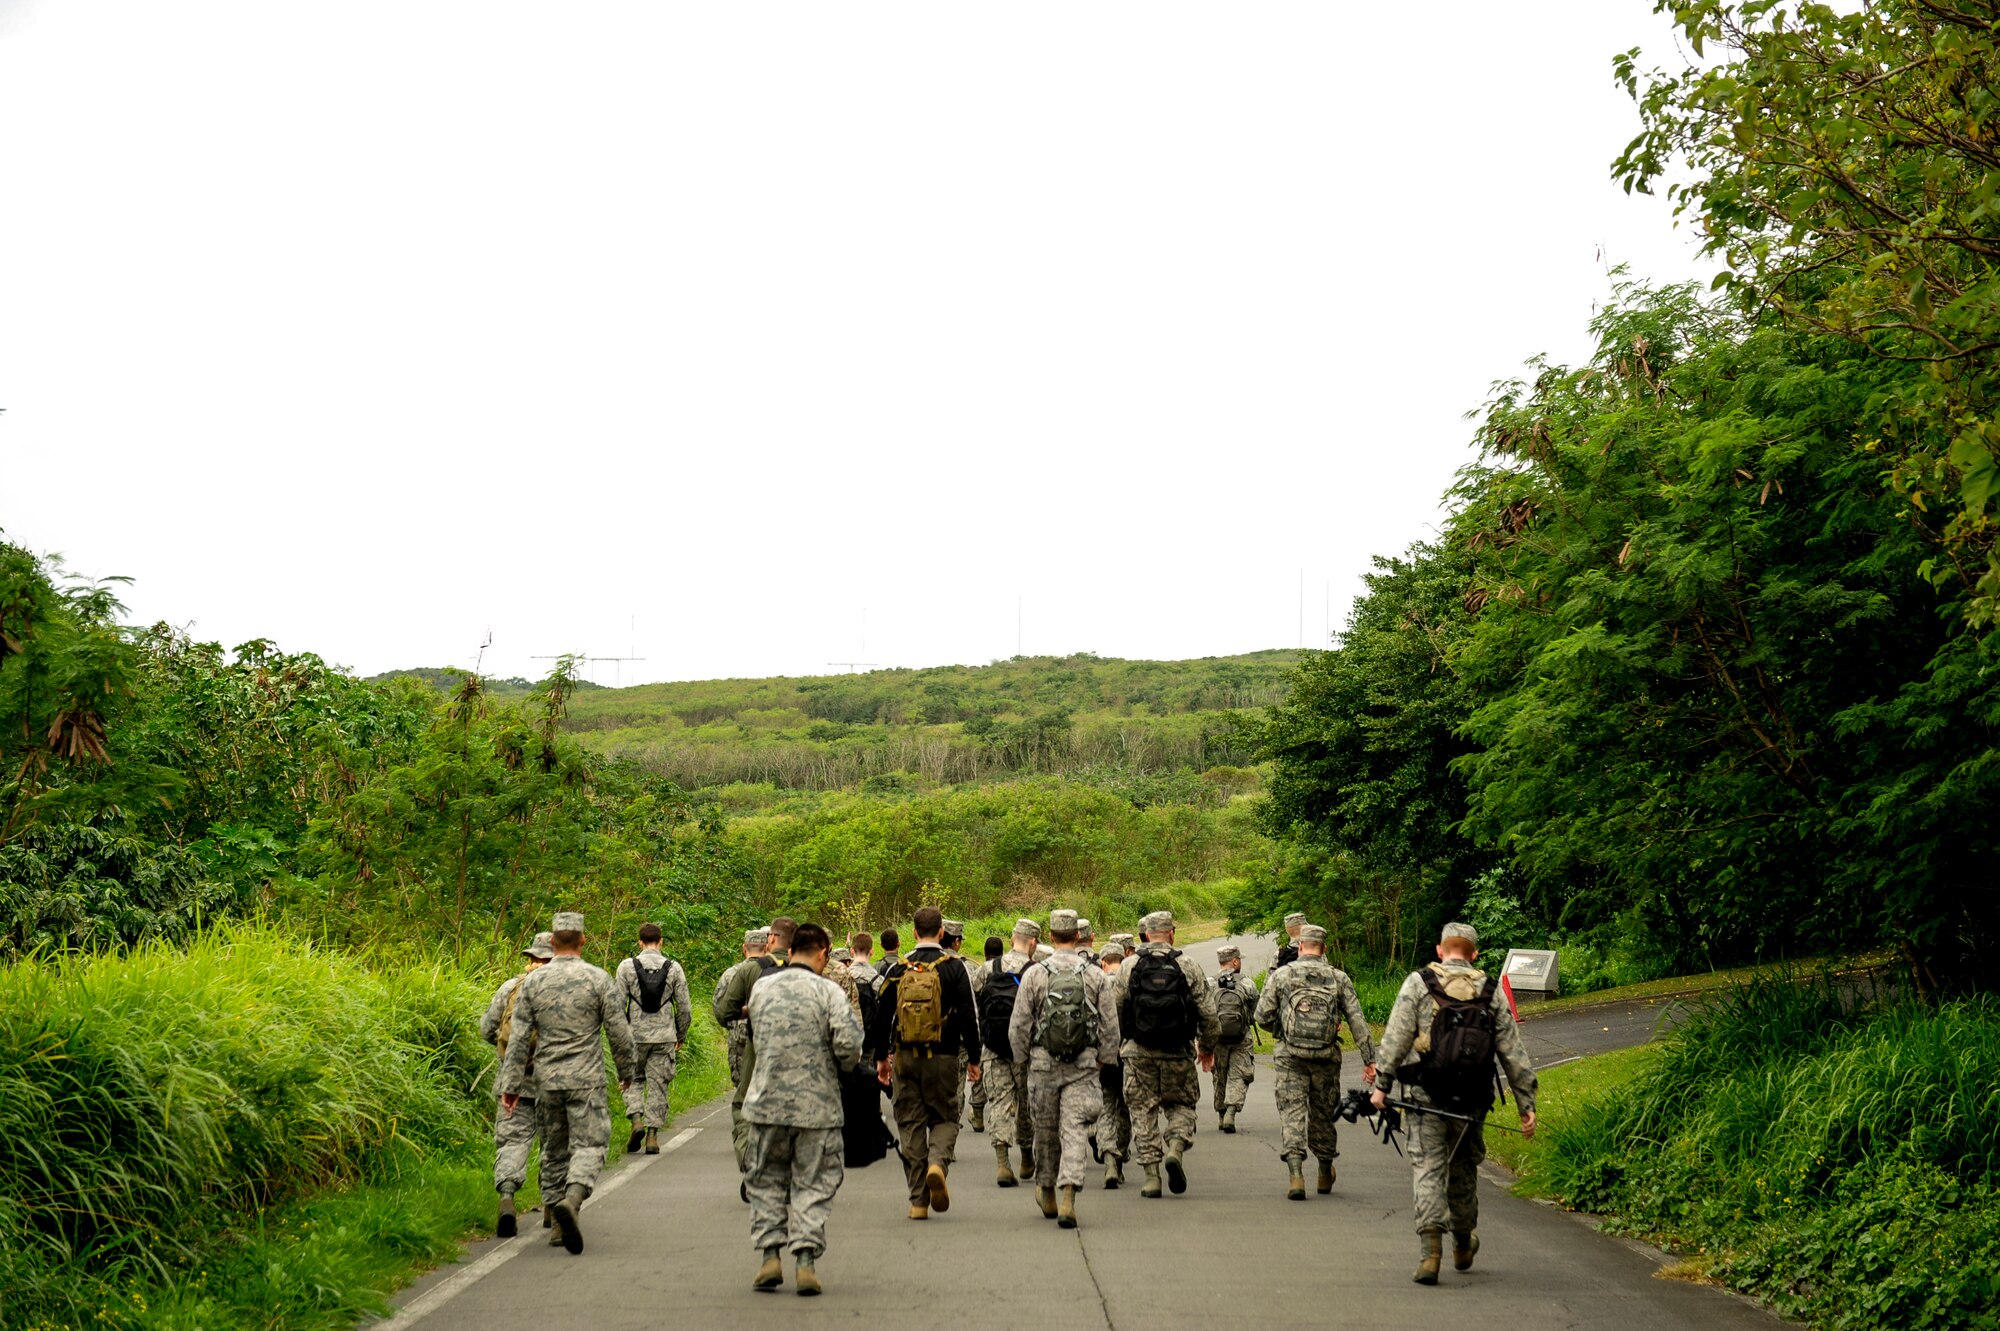 Airmen from Kadena Air Base, Japan, embark on a hike toward Mount Suribachi, Jan. 8, 2015, on Iwo To, Japan.  The Airmen arrived on an aircraft that conducted a training mission to the island. They hiked approximately 10 miles through the south side of the island to pay homage to the fallen heroes of Iwo Jima. (U.S. Air Force photo by Airman 1st Class John Linzmeier)